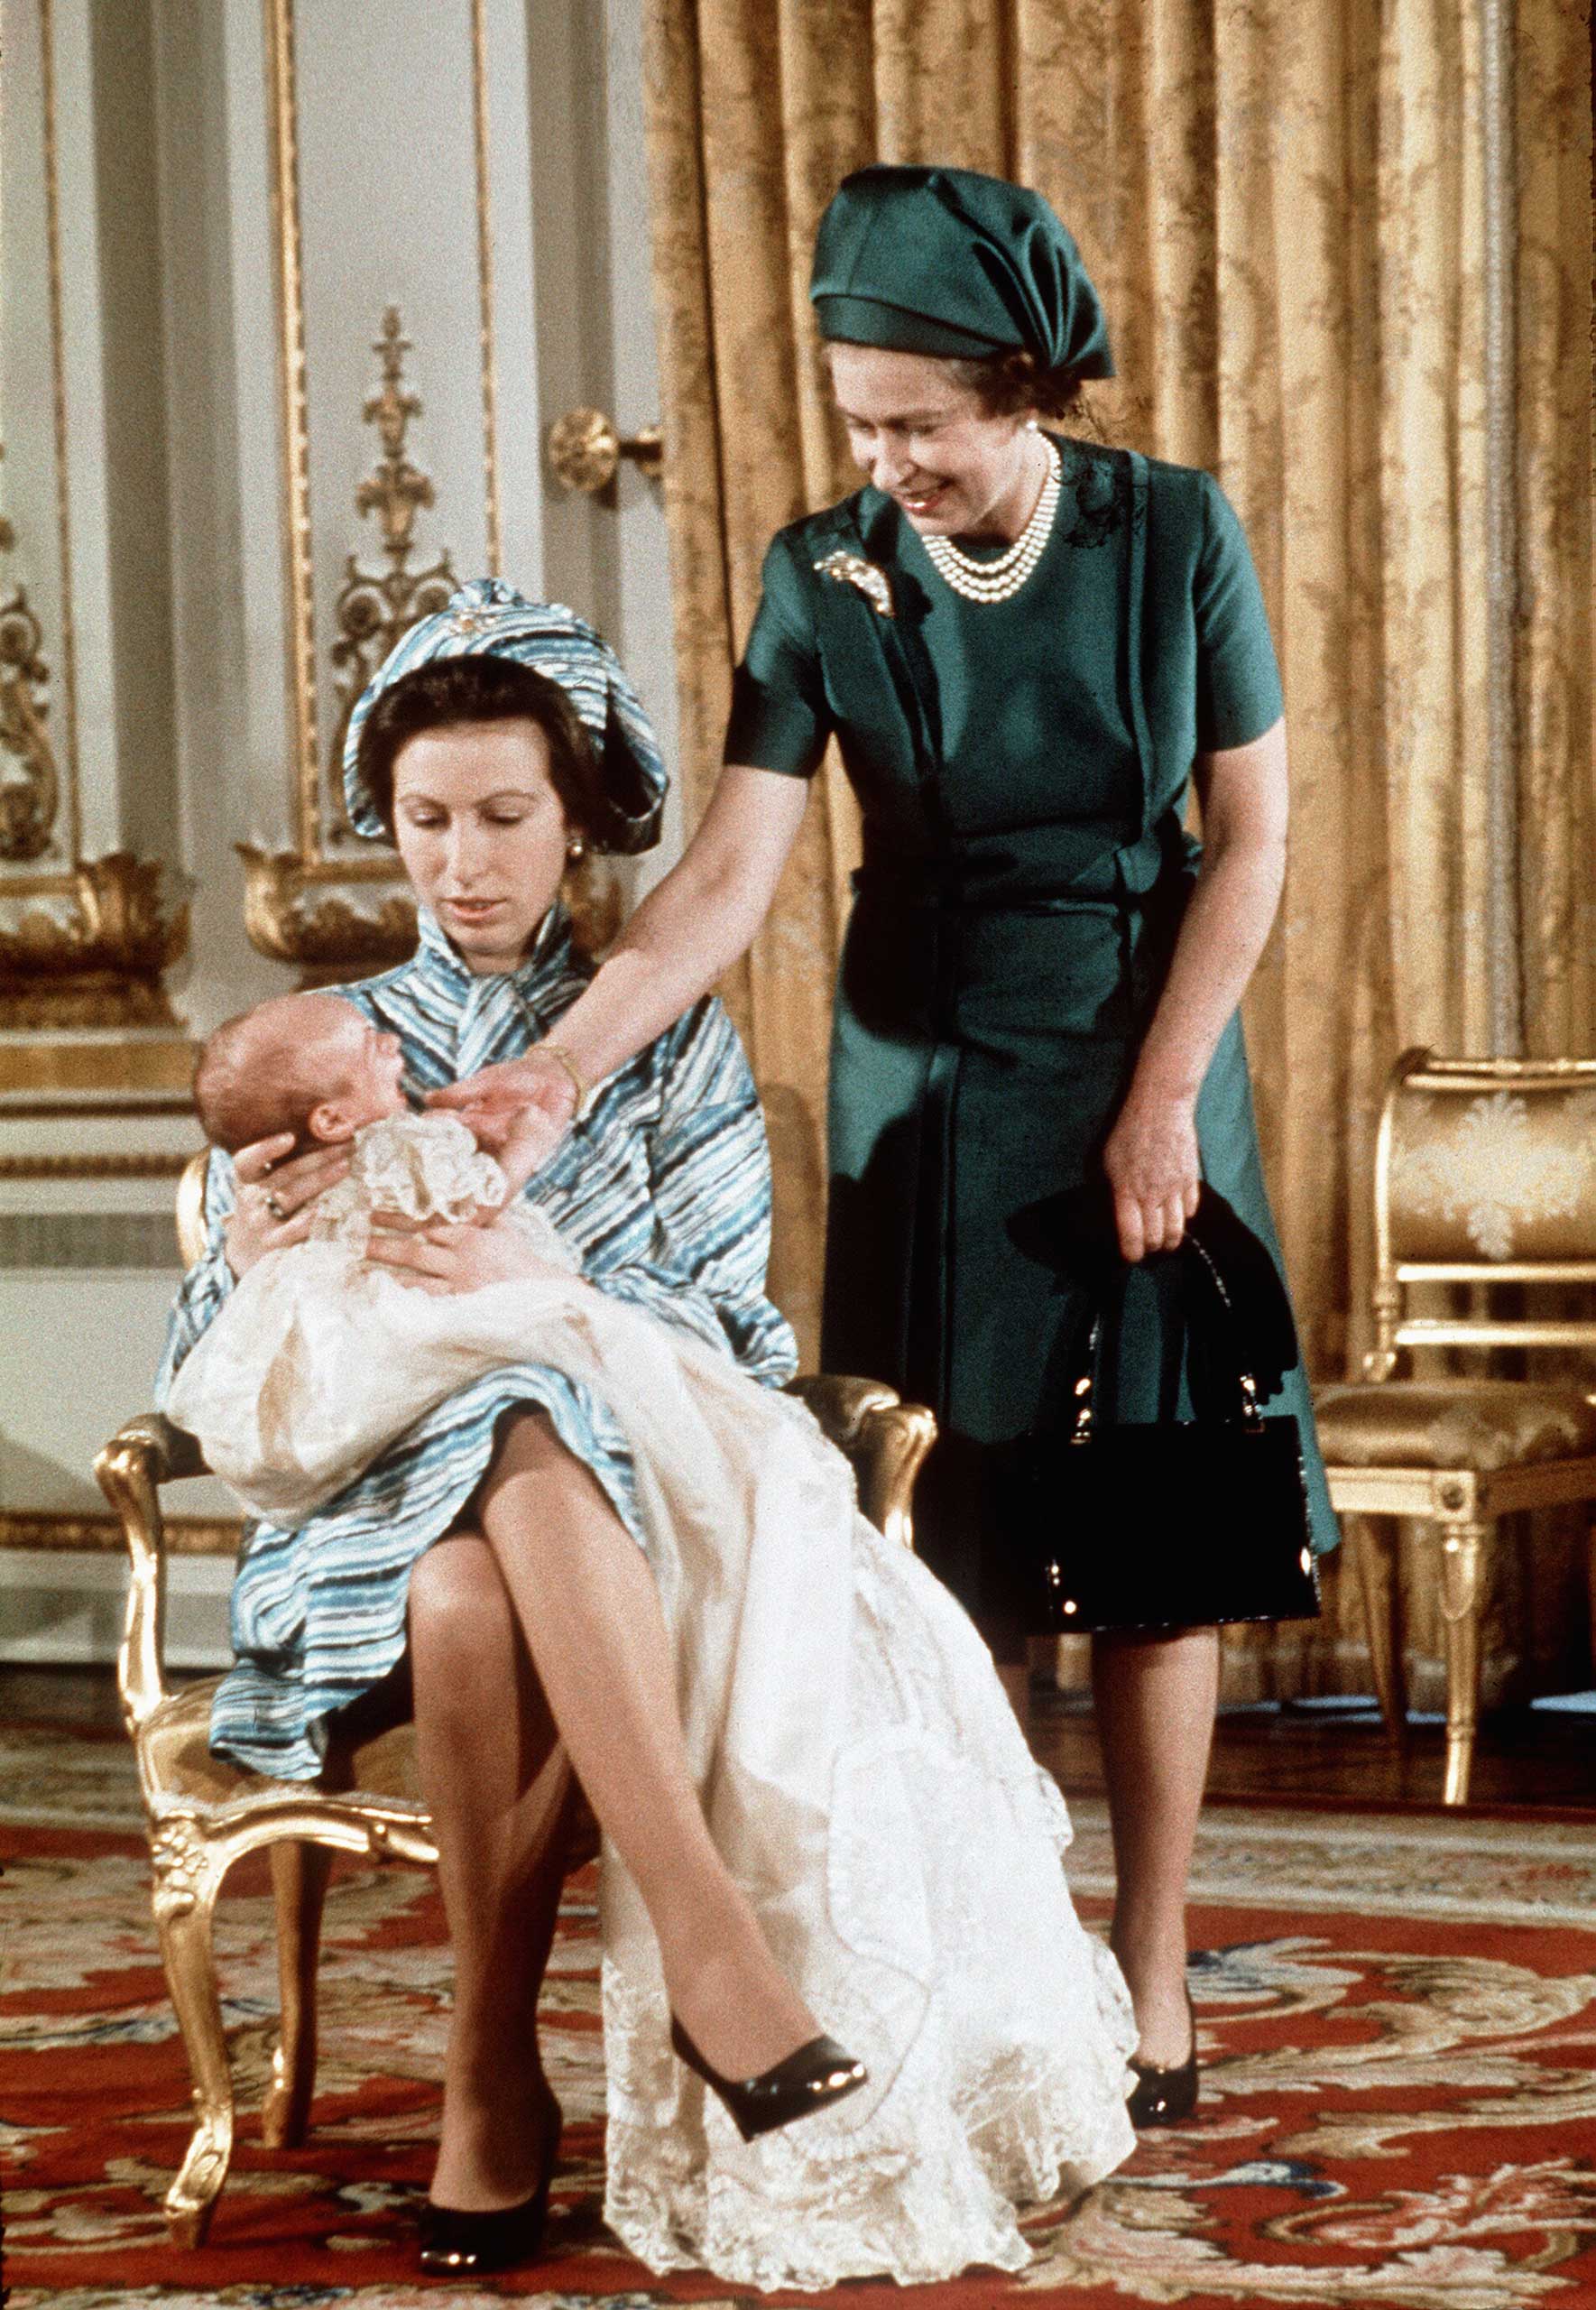 The Queen admires her first grandchild, Peter Phillips, at Balmoral Castle in November 1977.  Peter's mother, Princess Anne, declined royal titles for both of her children.